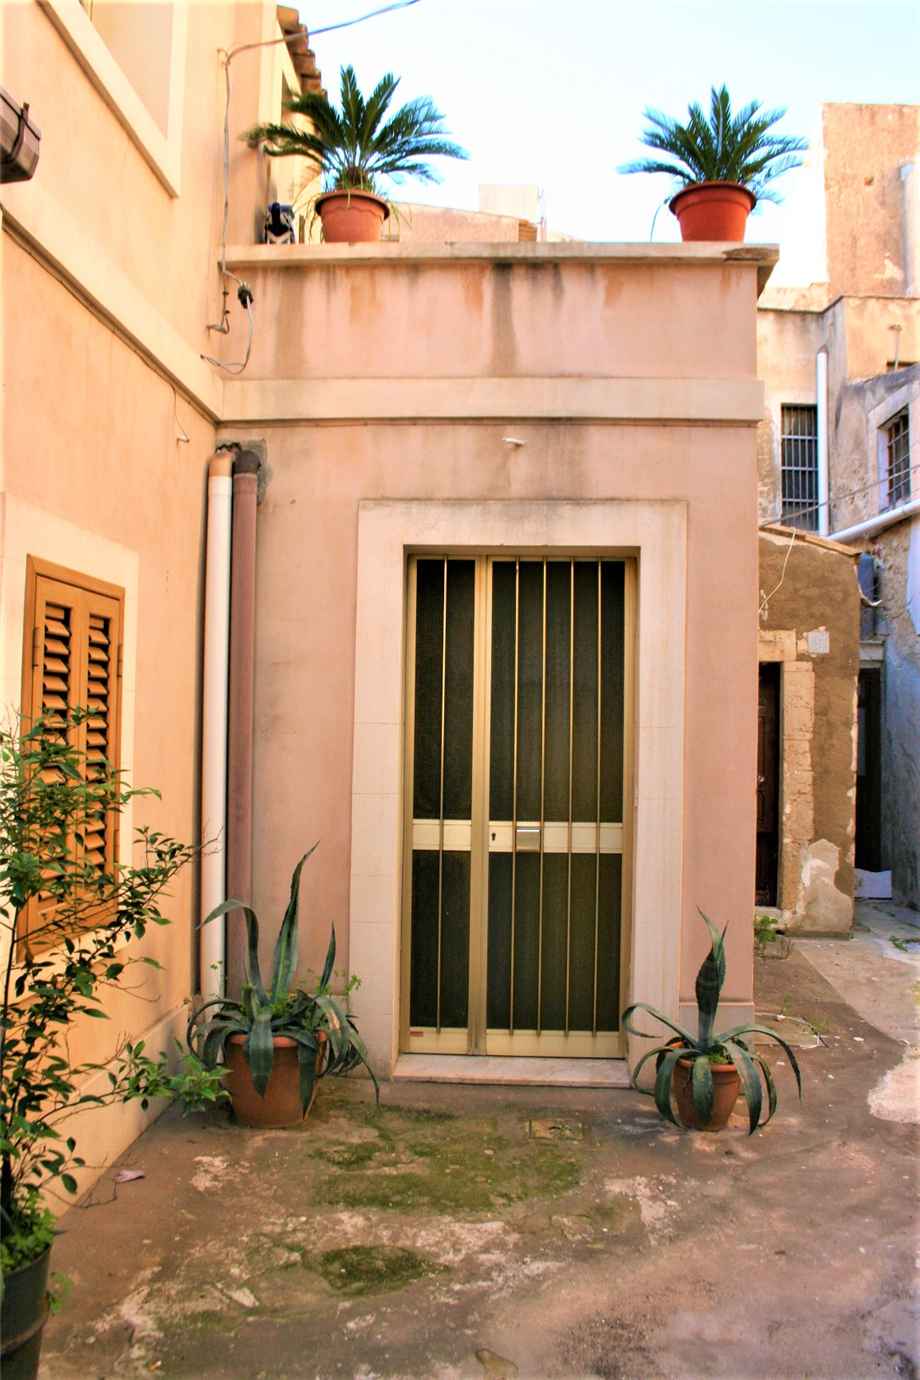 For sale Detached house Noto  #206C n.4